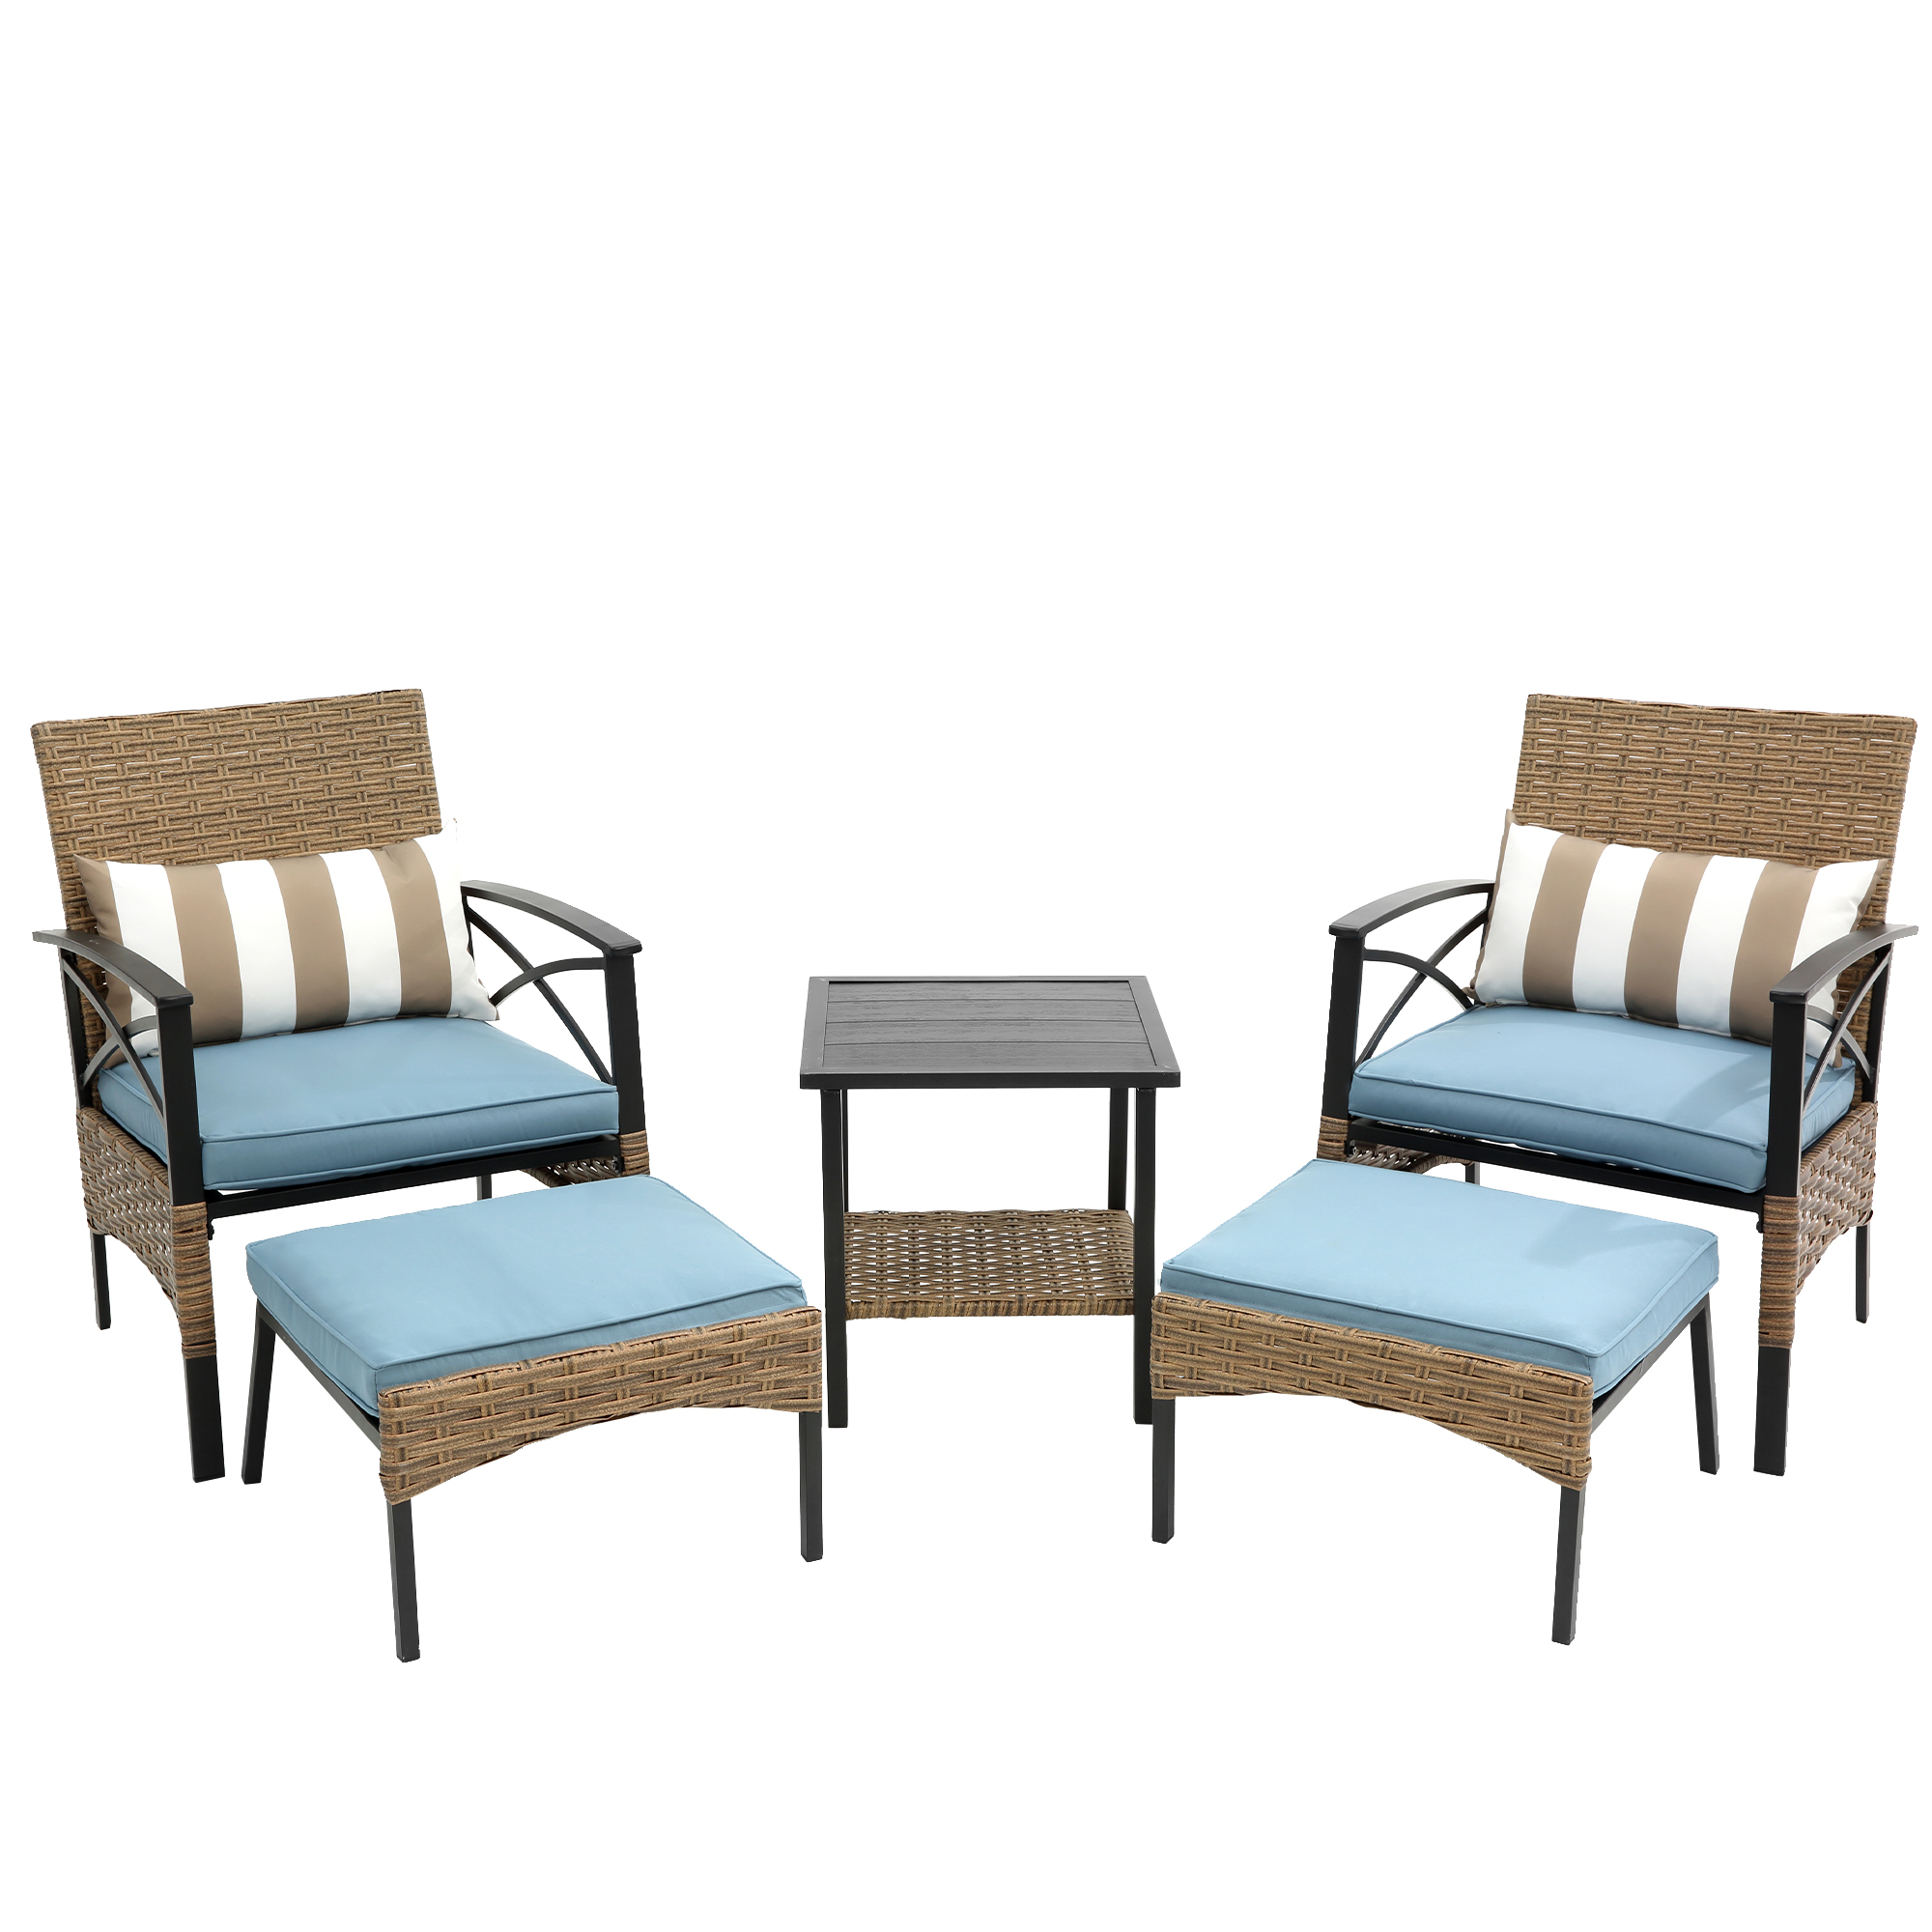 SYNGAR 5 Piece Outdoor Patio Furniture Set, PE Rattan Sectional Furniture Set with Coffee Table, Cushioned Chair and Ottoman, Patio Conversation Sofa Set, for Garden, Yard, Deck, Poolside, Blue, D1067 - image 3 of 10